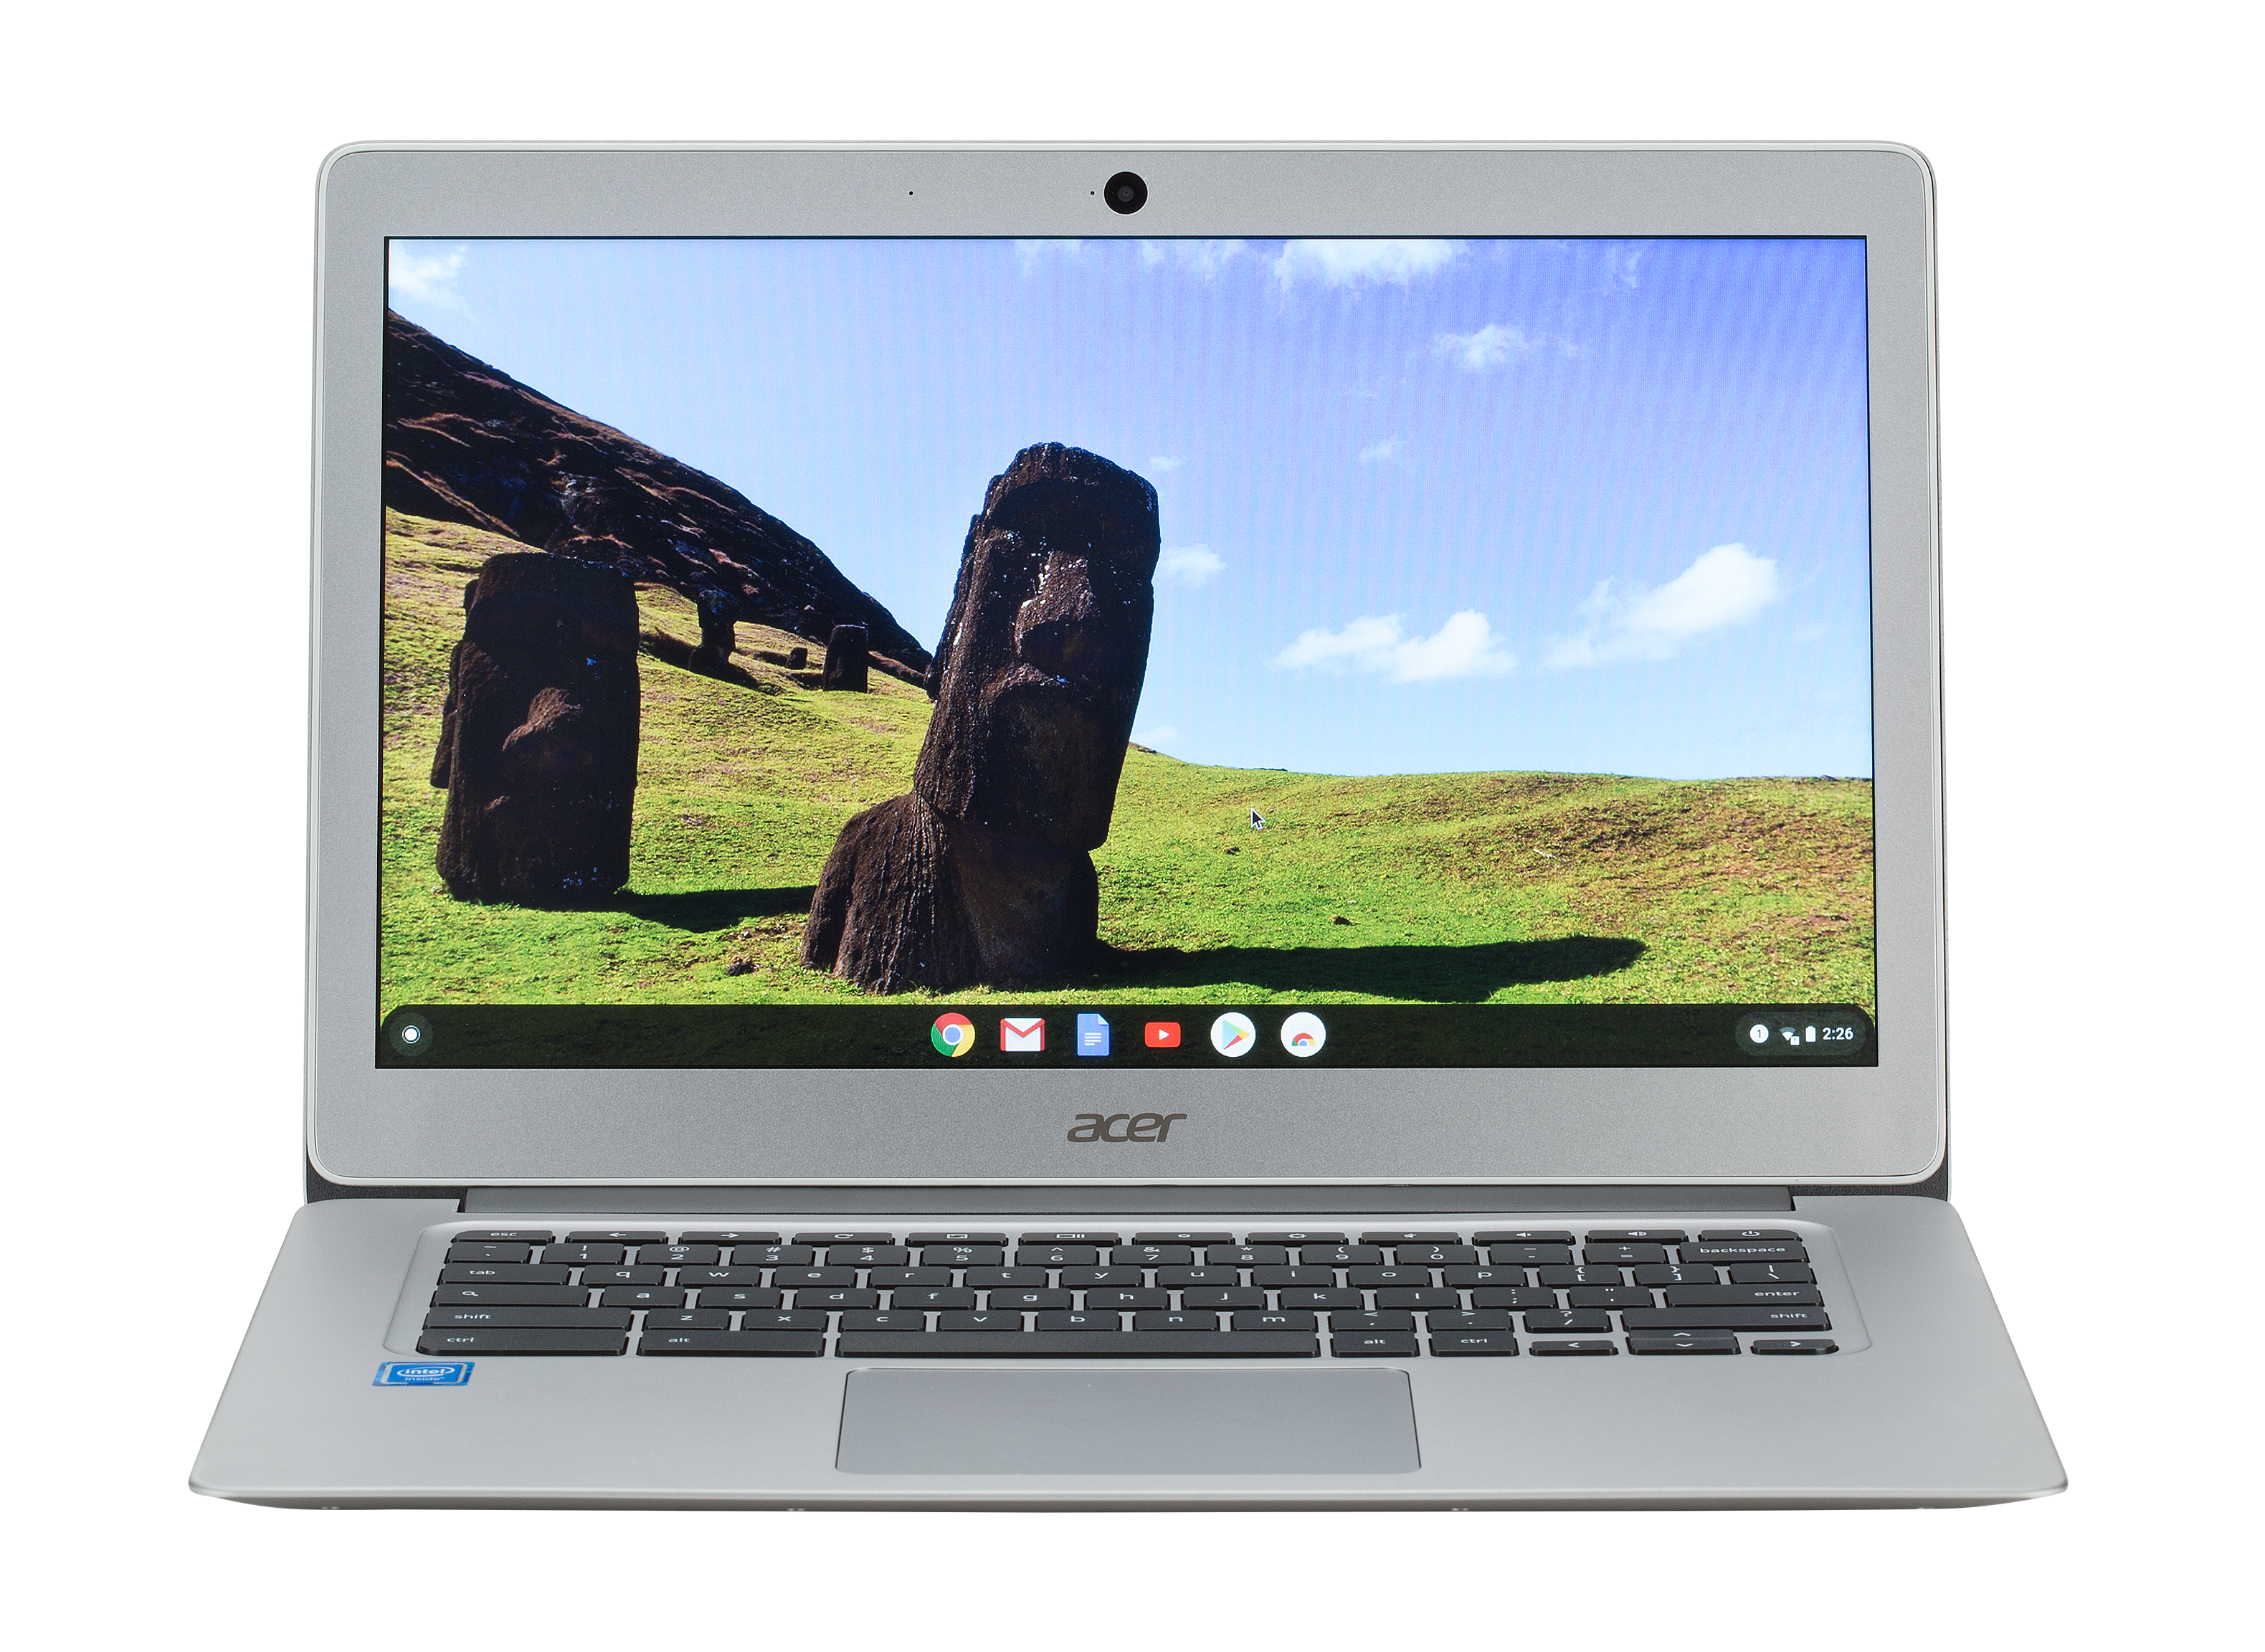 Happening spørge Nuværende Acer Chromebook CB3-431-12K1 Laptop & Chromebook Review - Consumer Reports